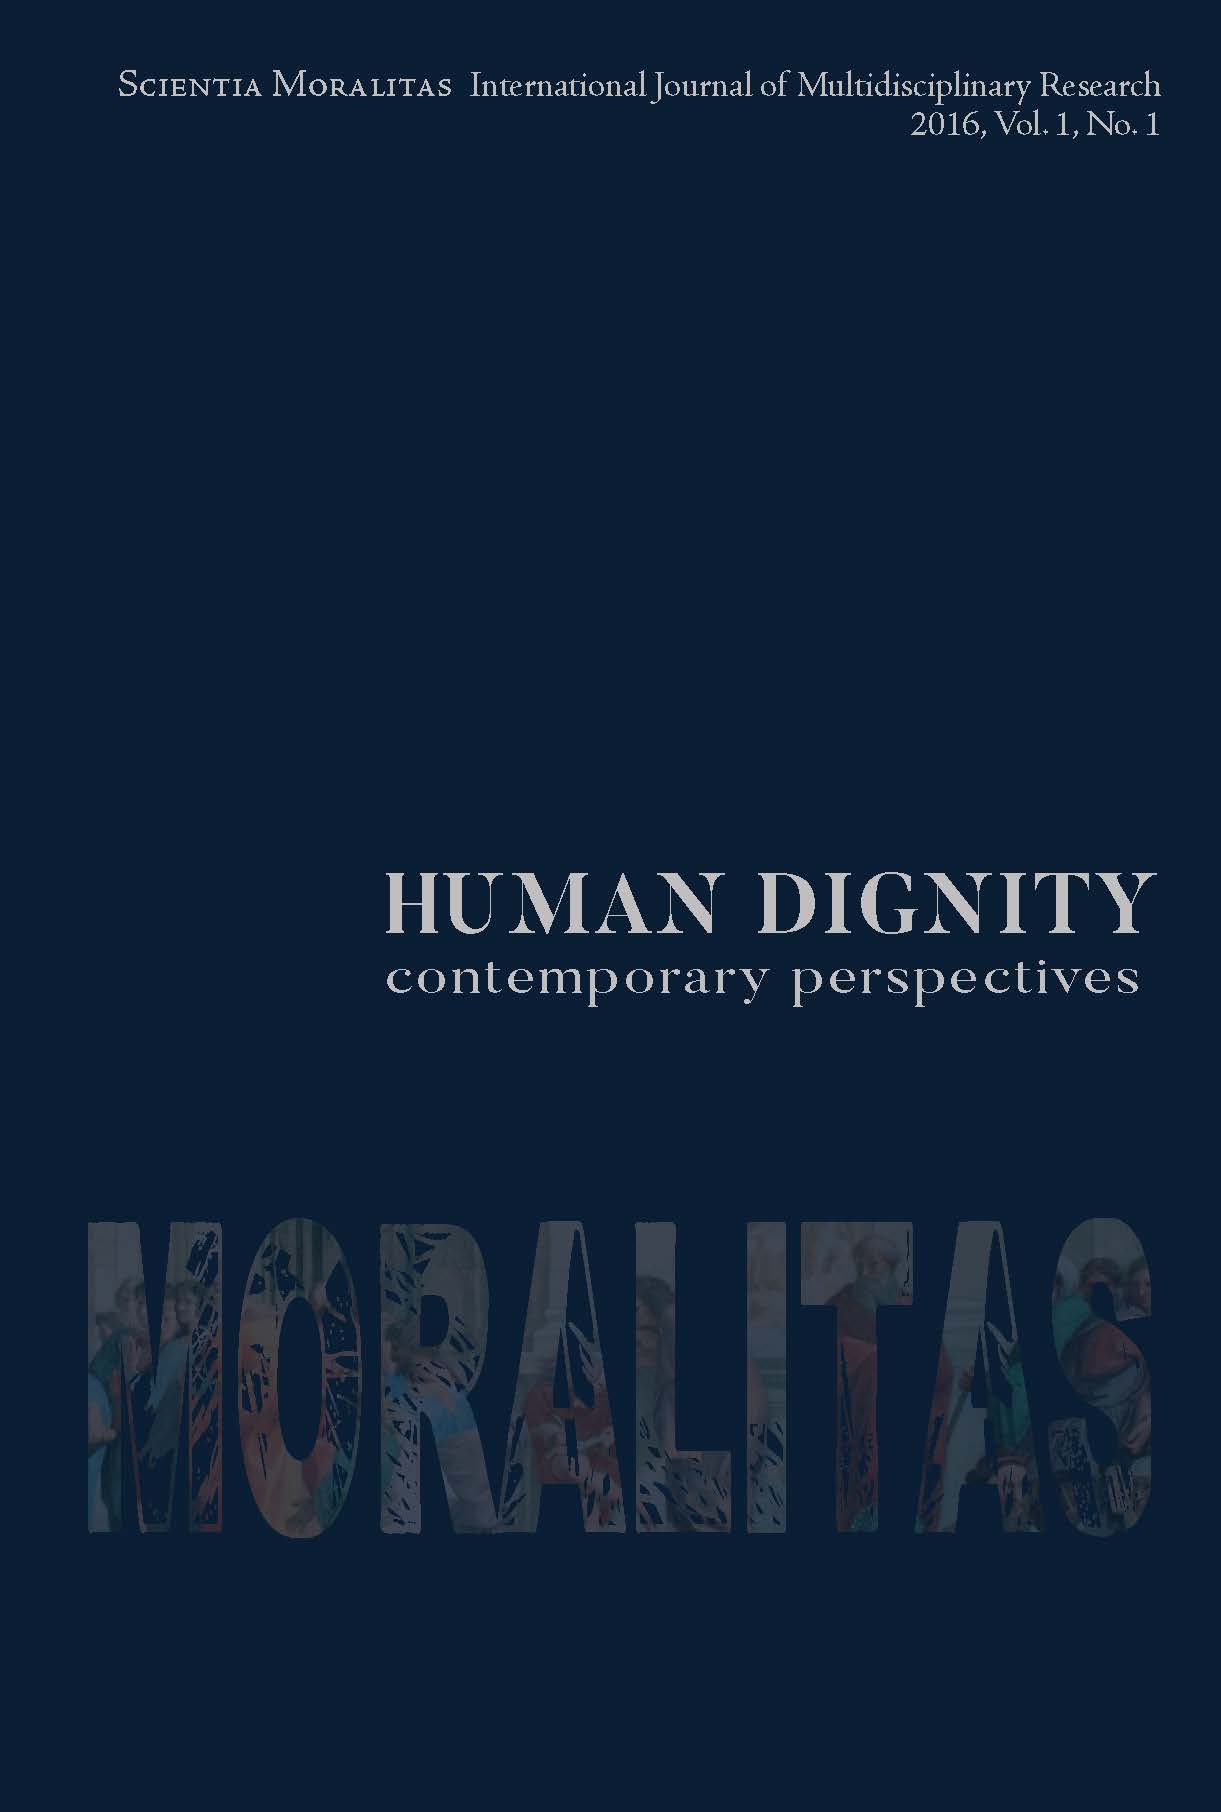 Communication of Human Dignity
—An approach on human rights